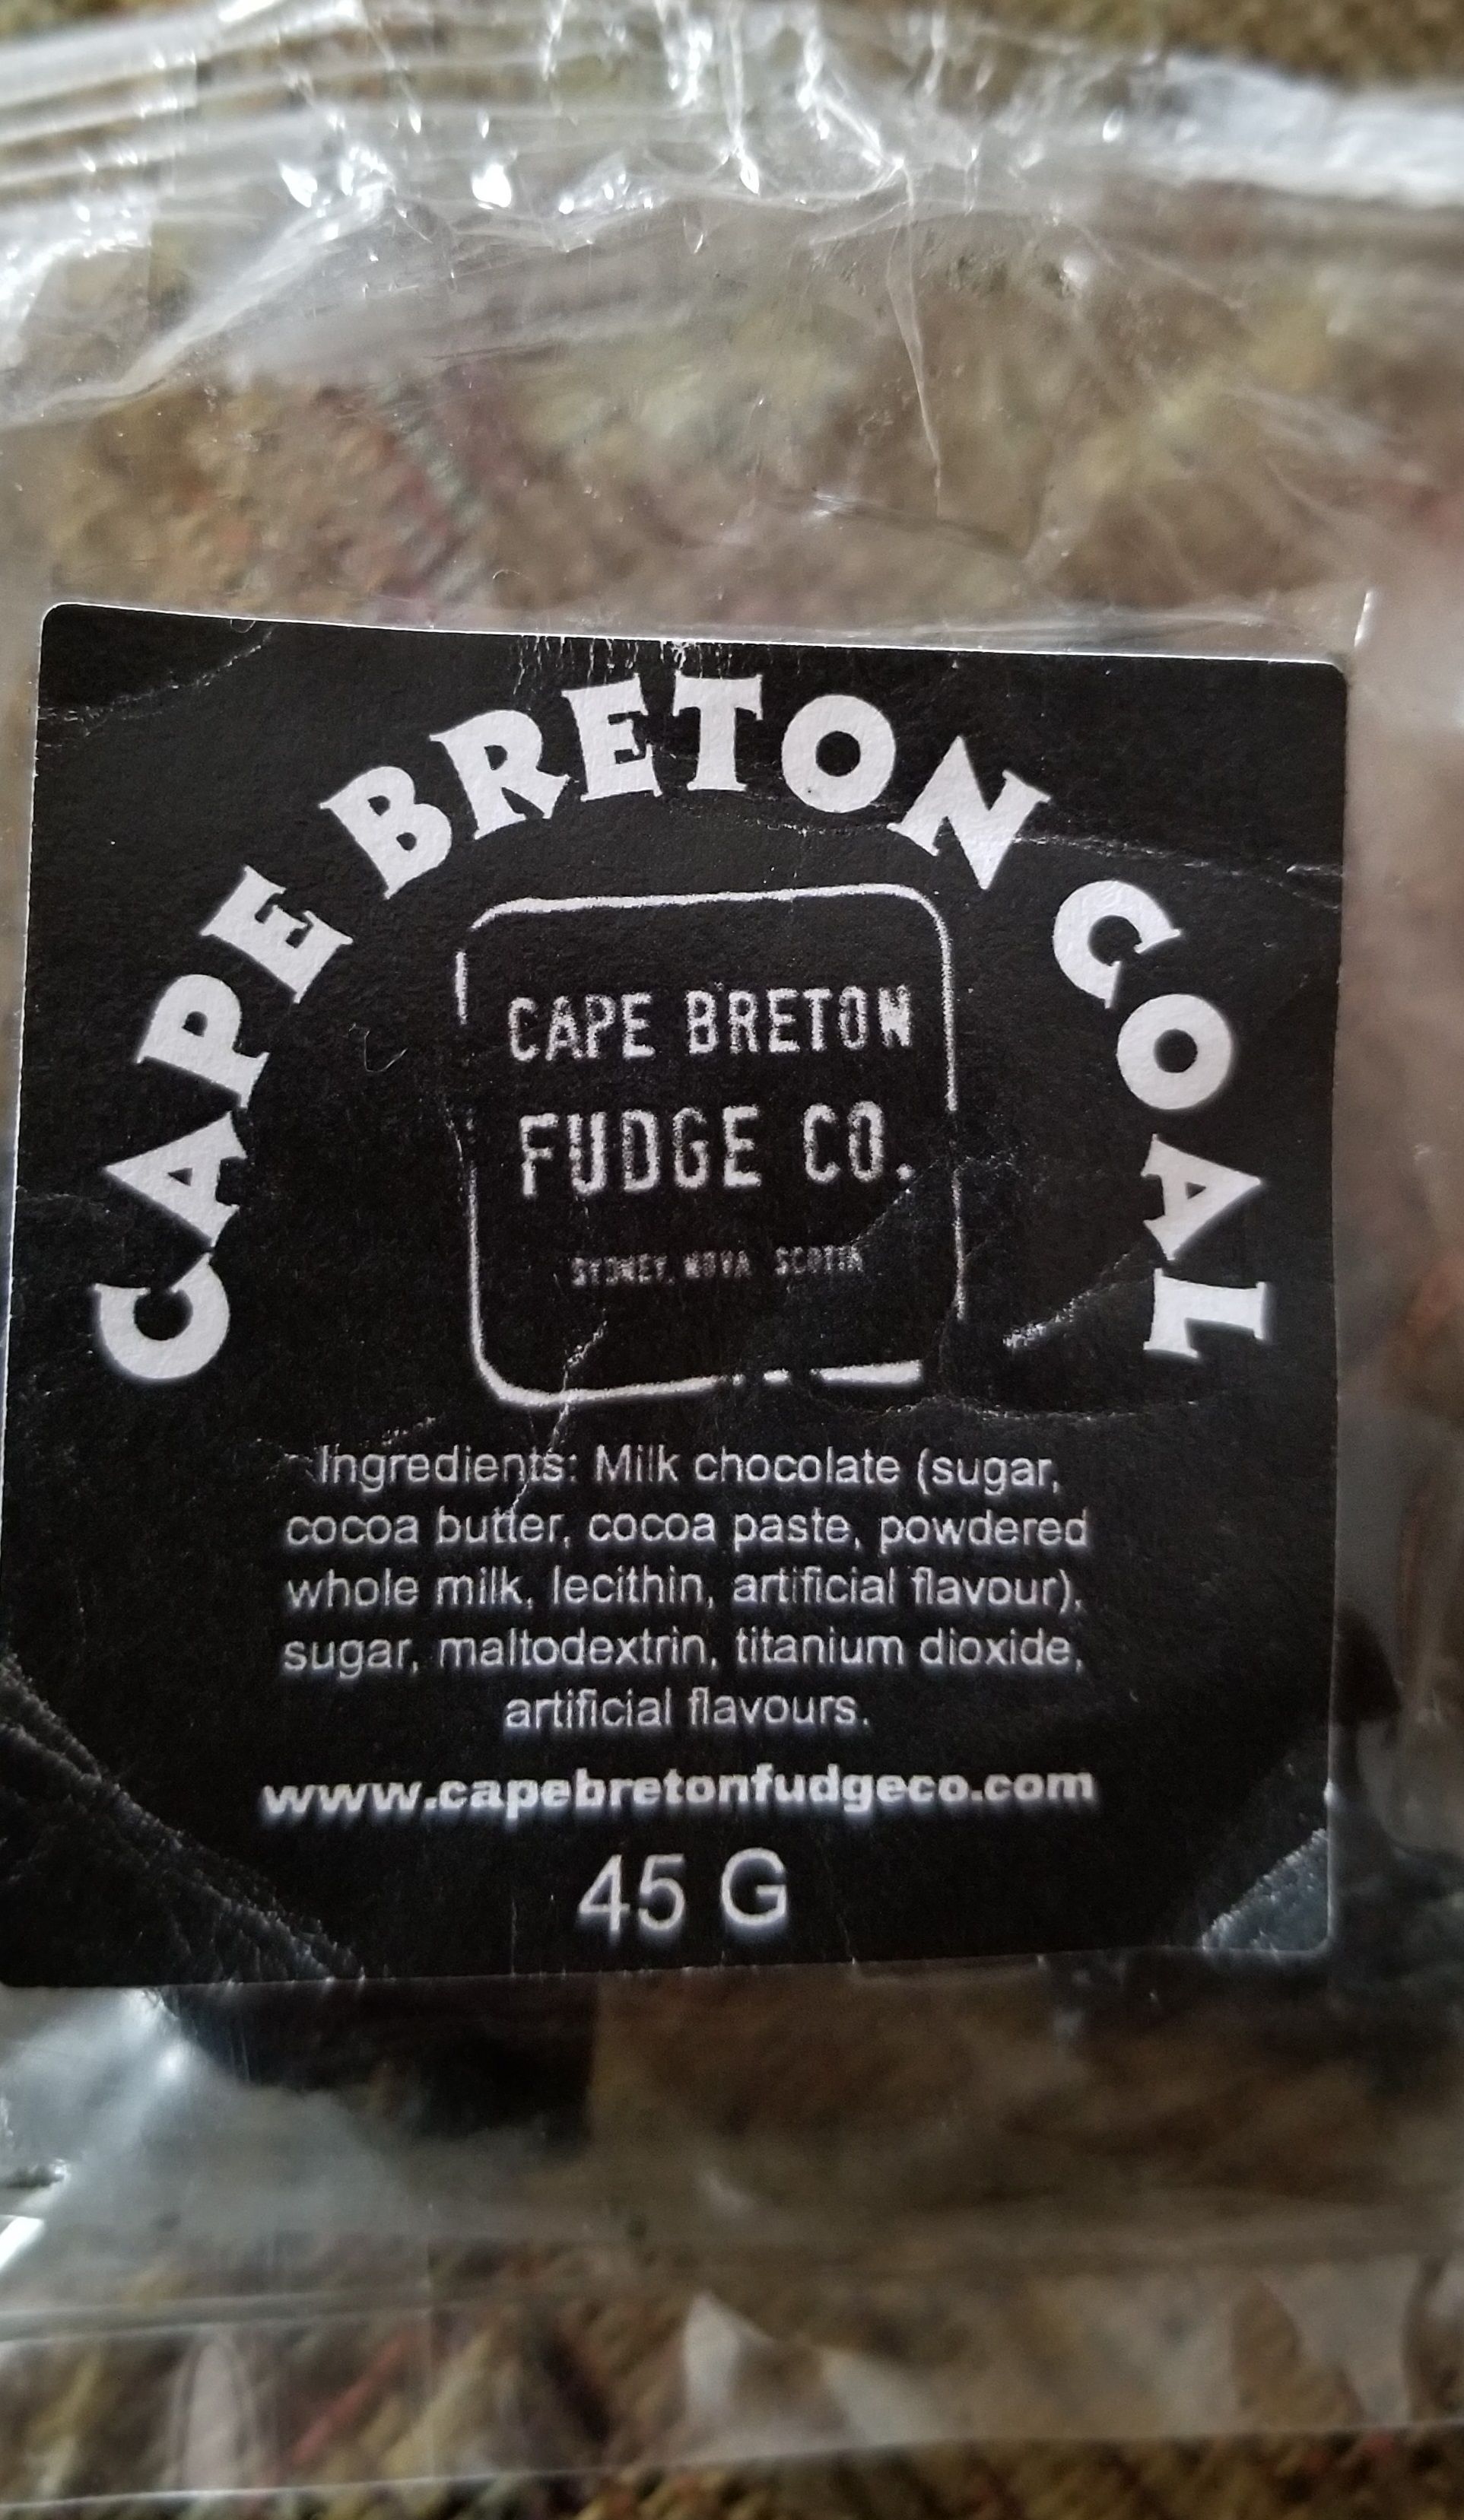 Cape Breton Coal candy recalled due to undeclared walnuts